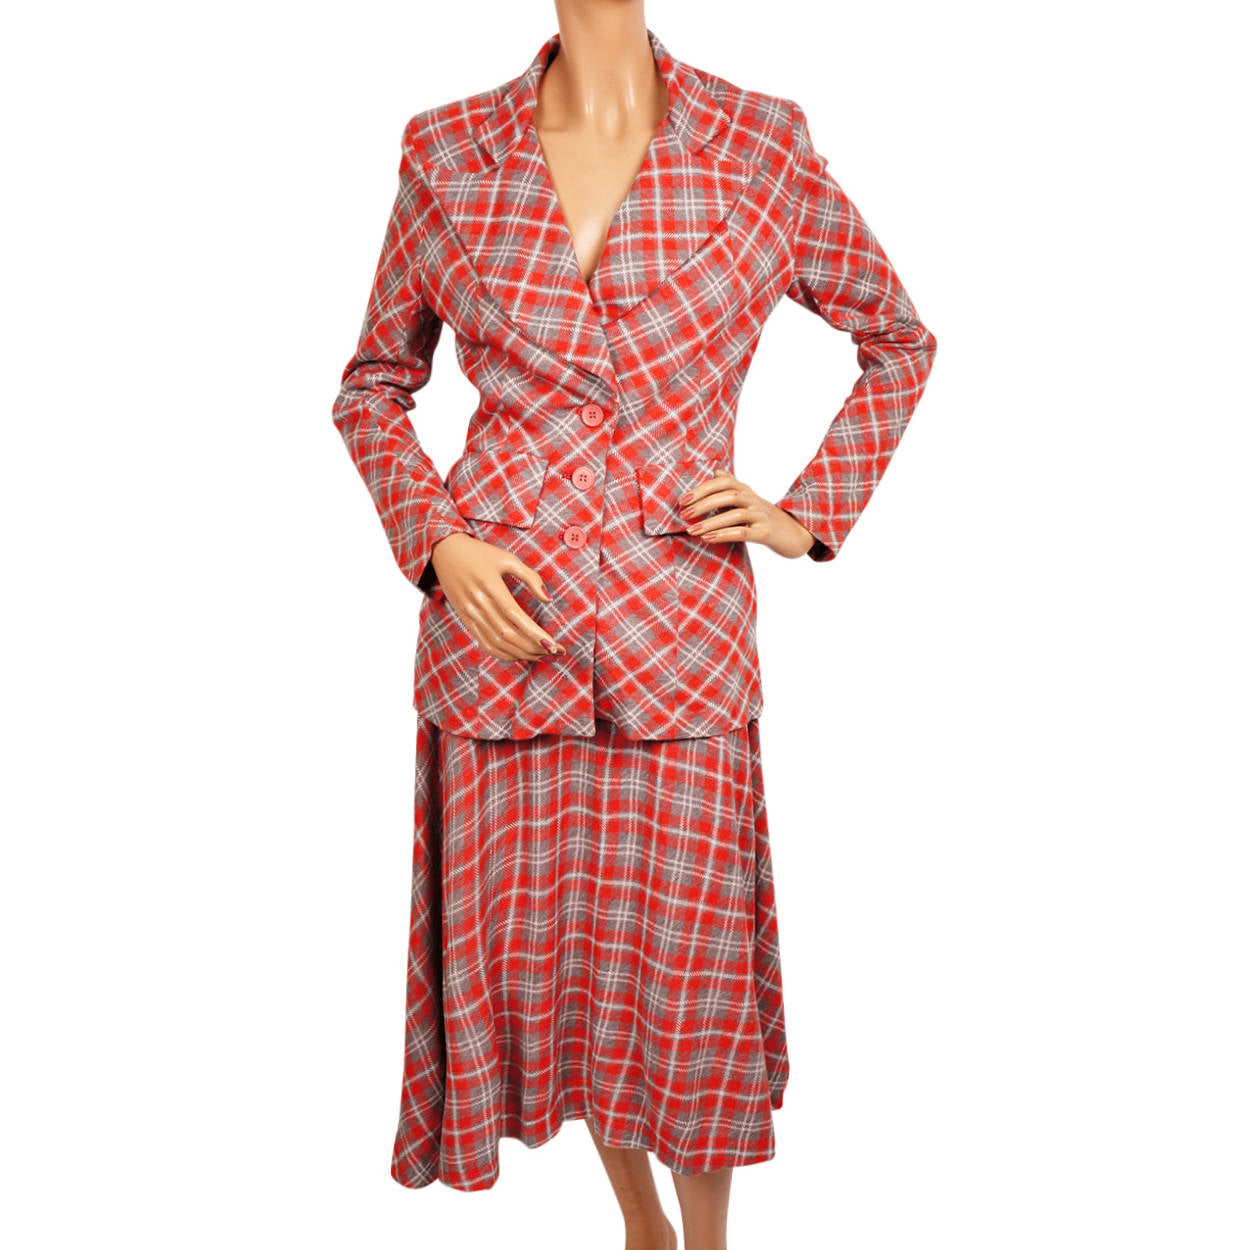 Vintage 1960s Plaid Wool Suit by Margaret Godfrey for Bagatelle Size S